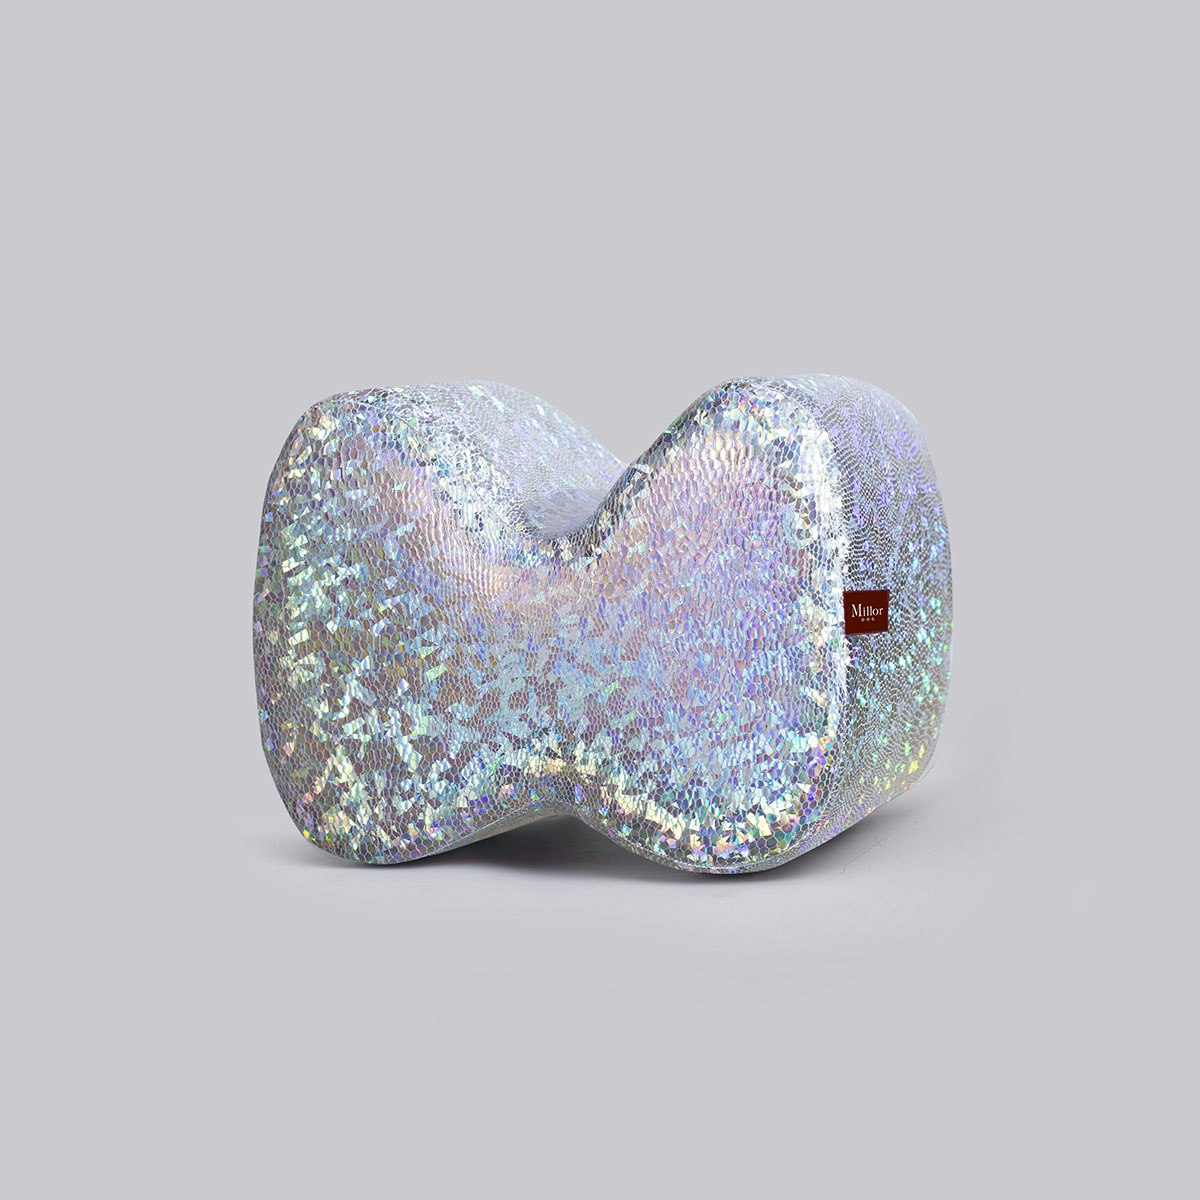 MILLOR DOG -PILLOW BOW GLITTER SILVER